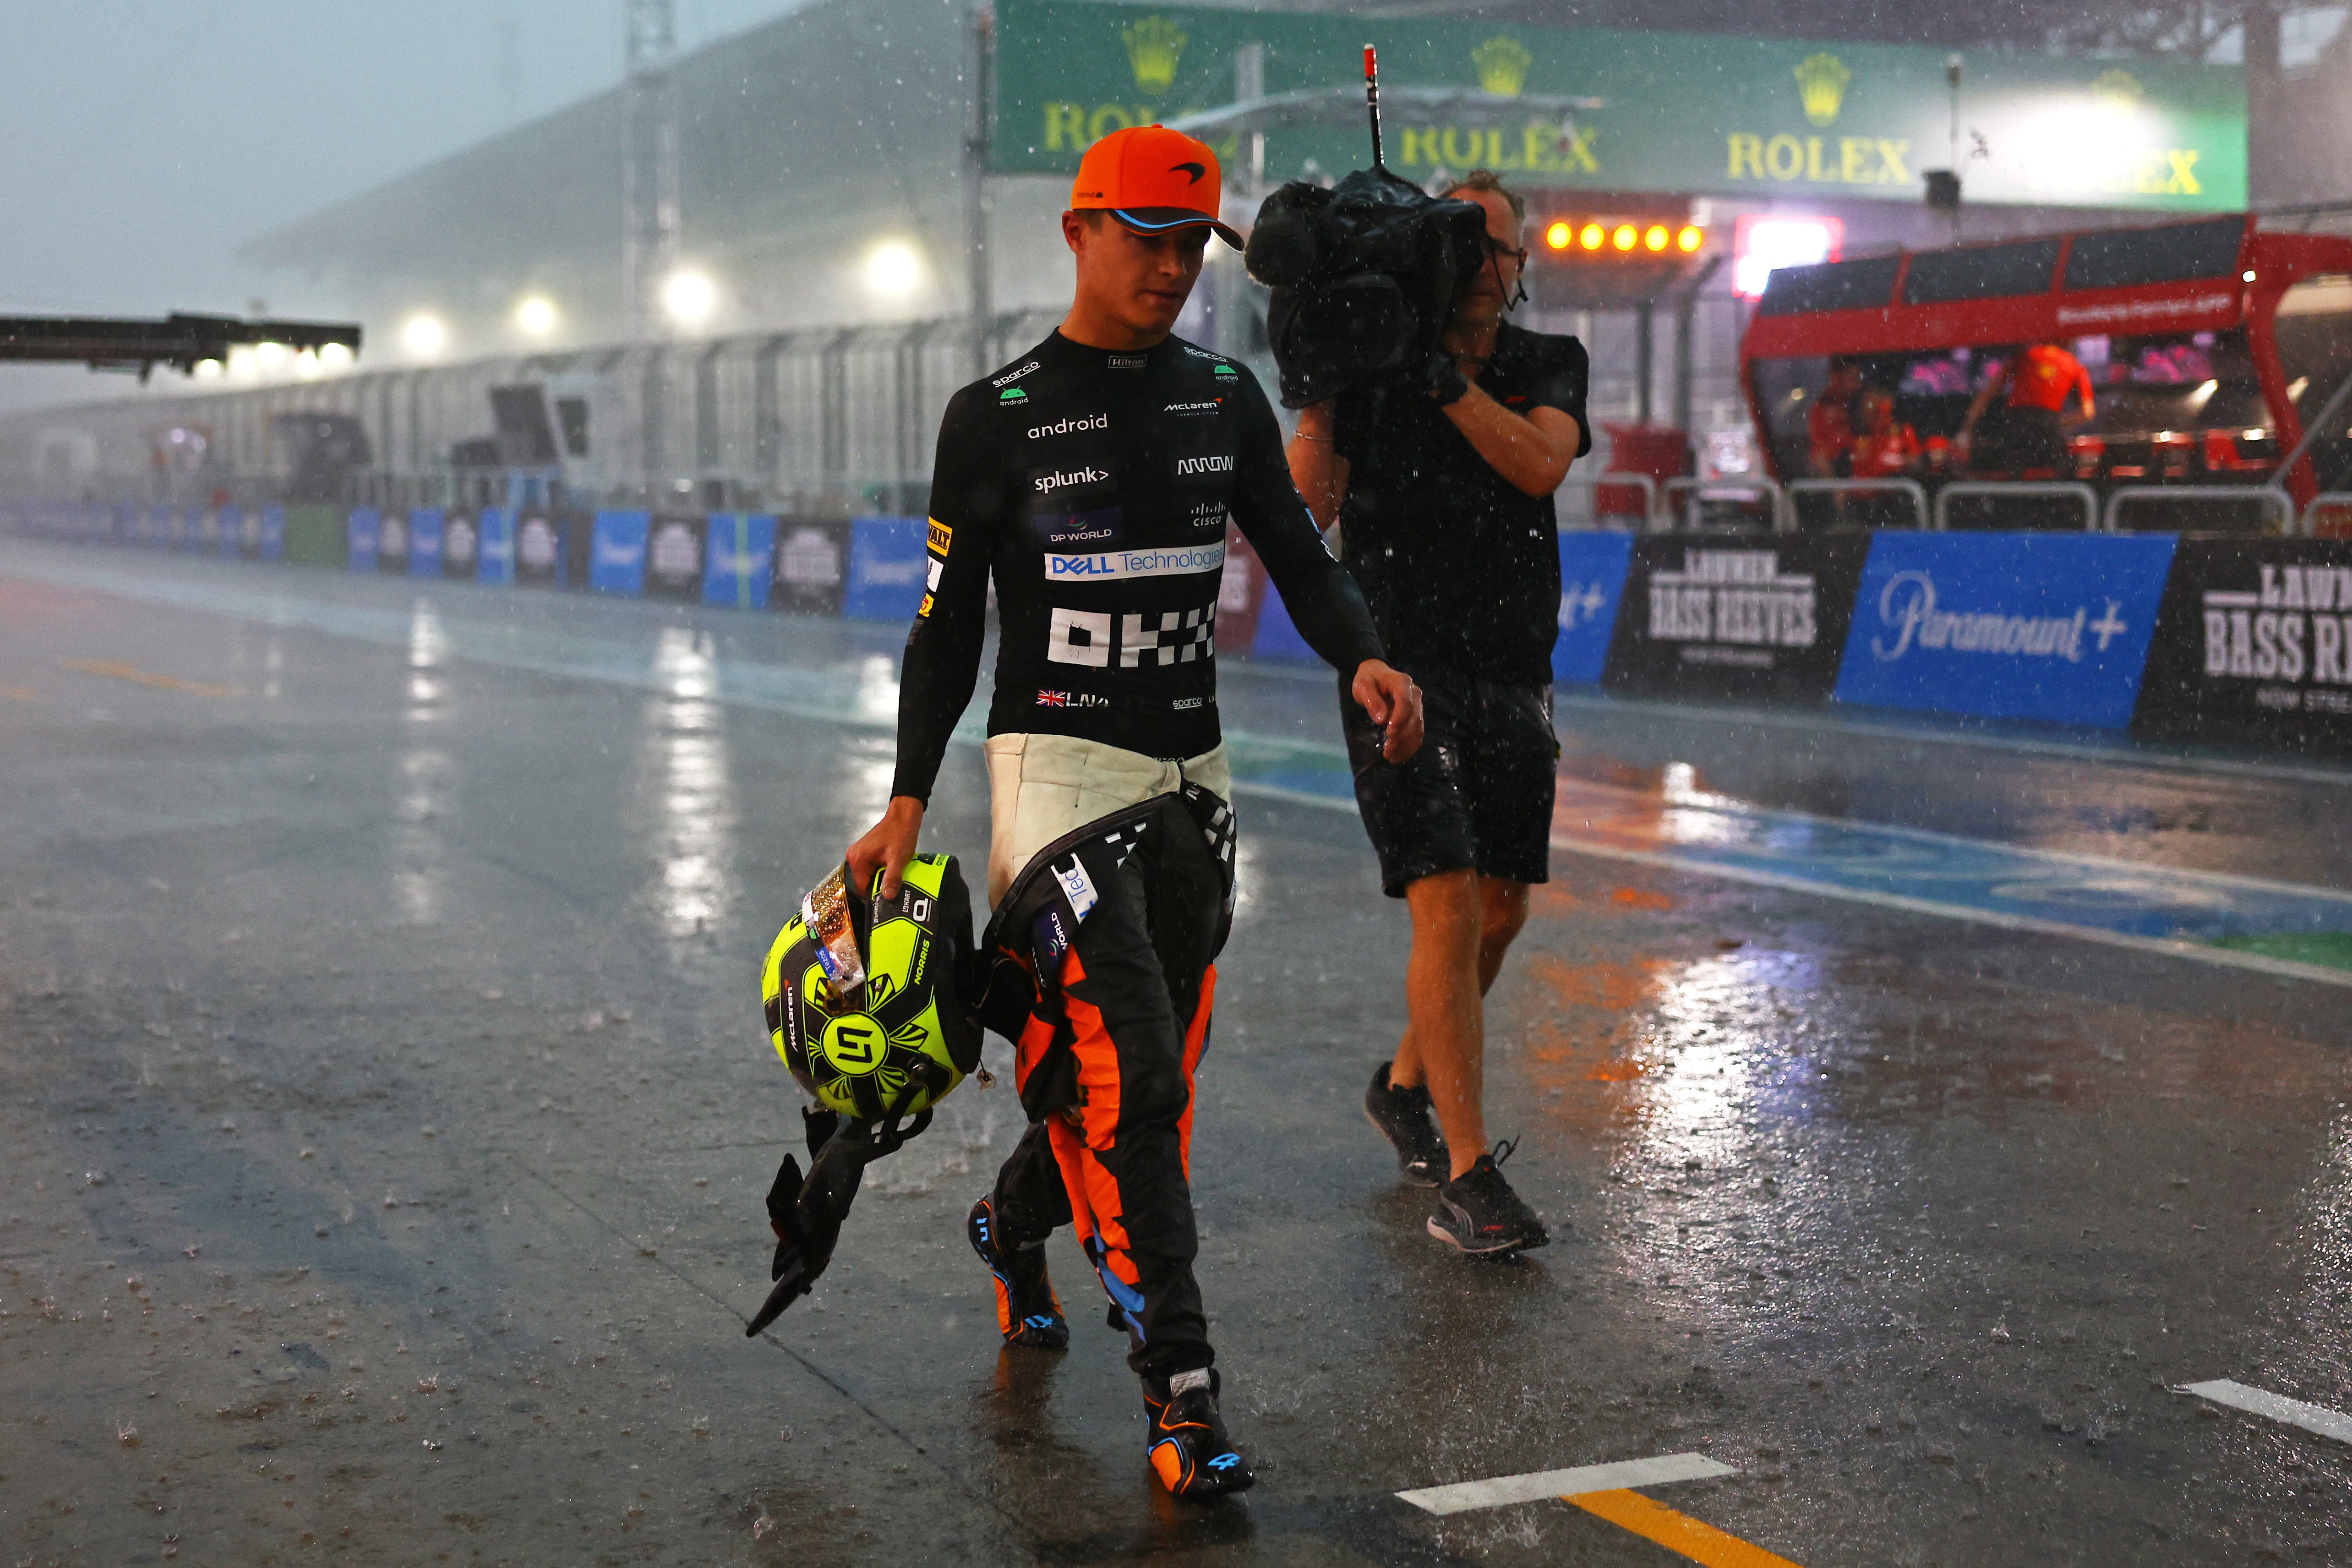 Torrential rain meant qualifying was curtailed early at Interlagos